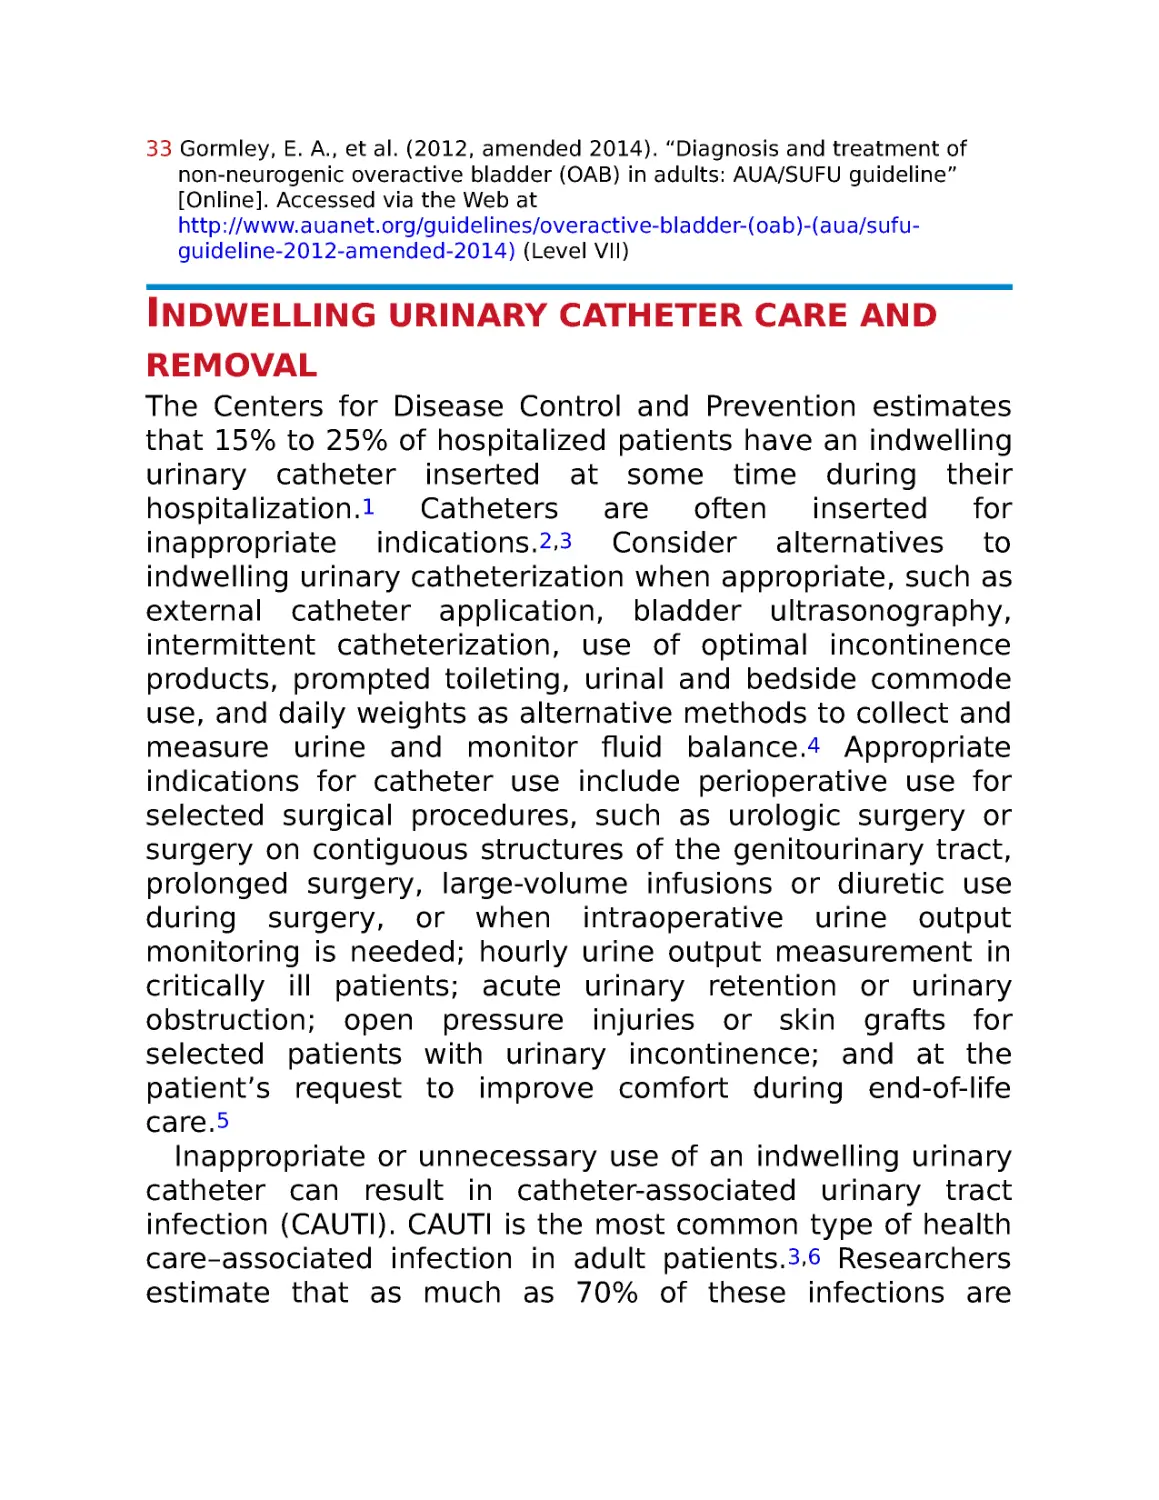 Indwelling urinary catheter care and removal